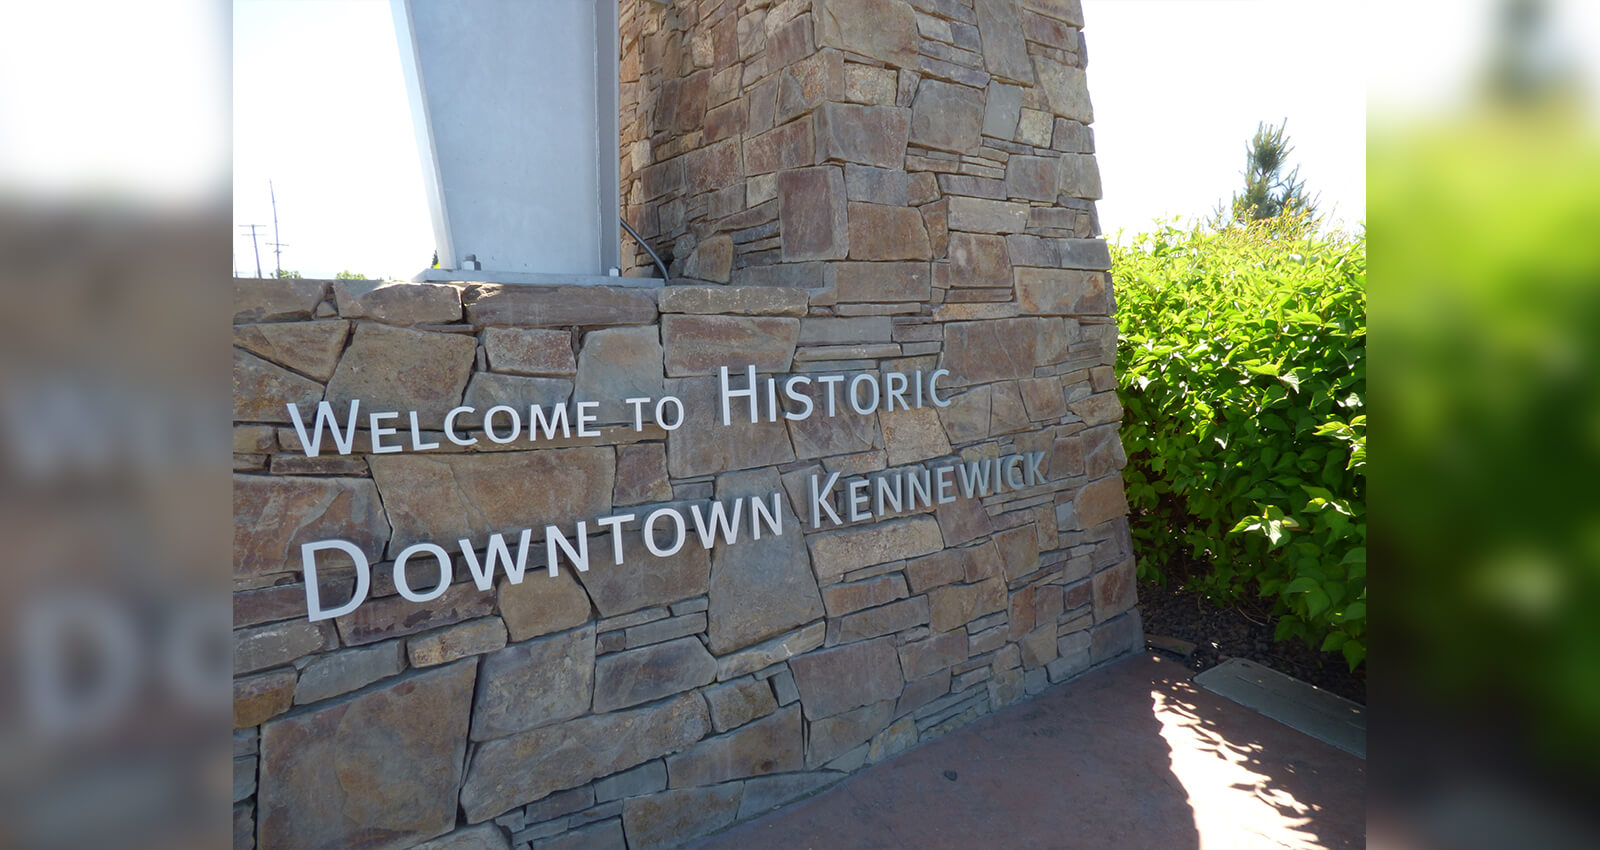 Welcome to Historic Downtown Kennewick sign on island's gateway arch.